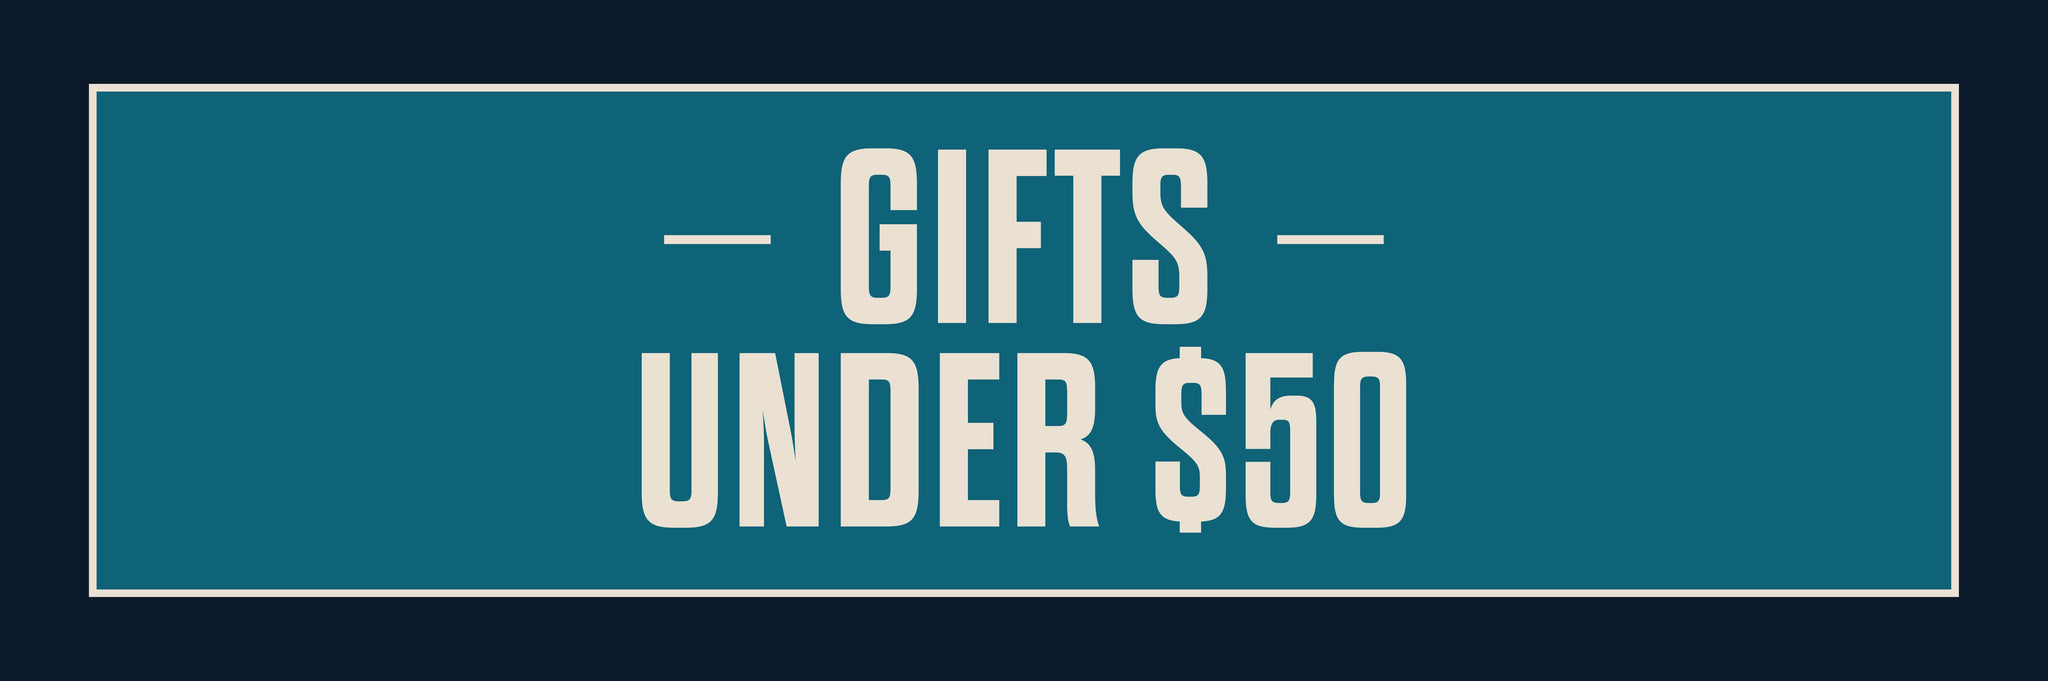 2023 Gift Guide - Gifts Under $50 | STAG